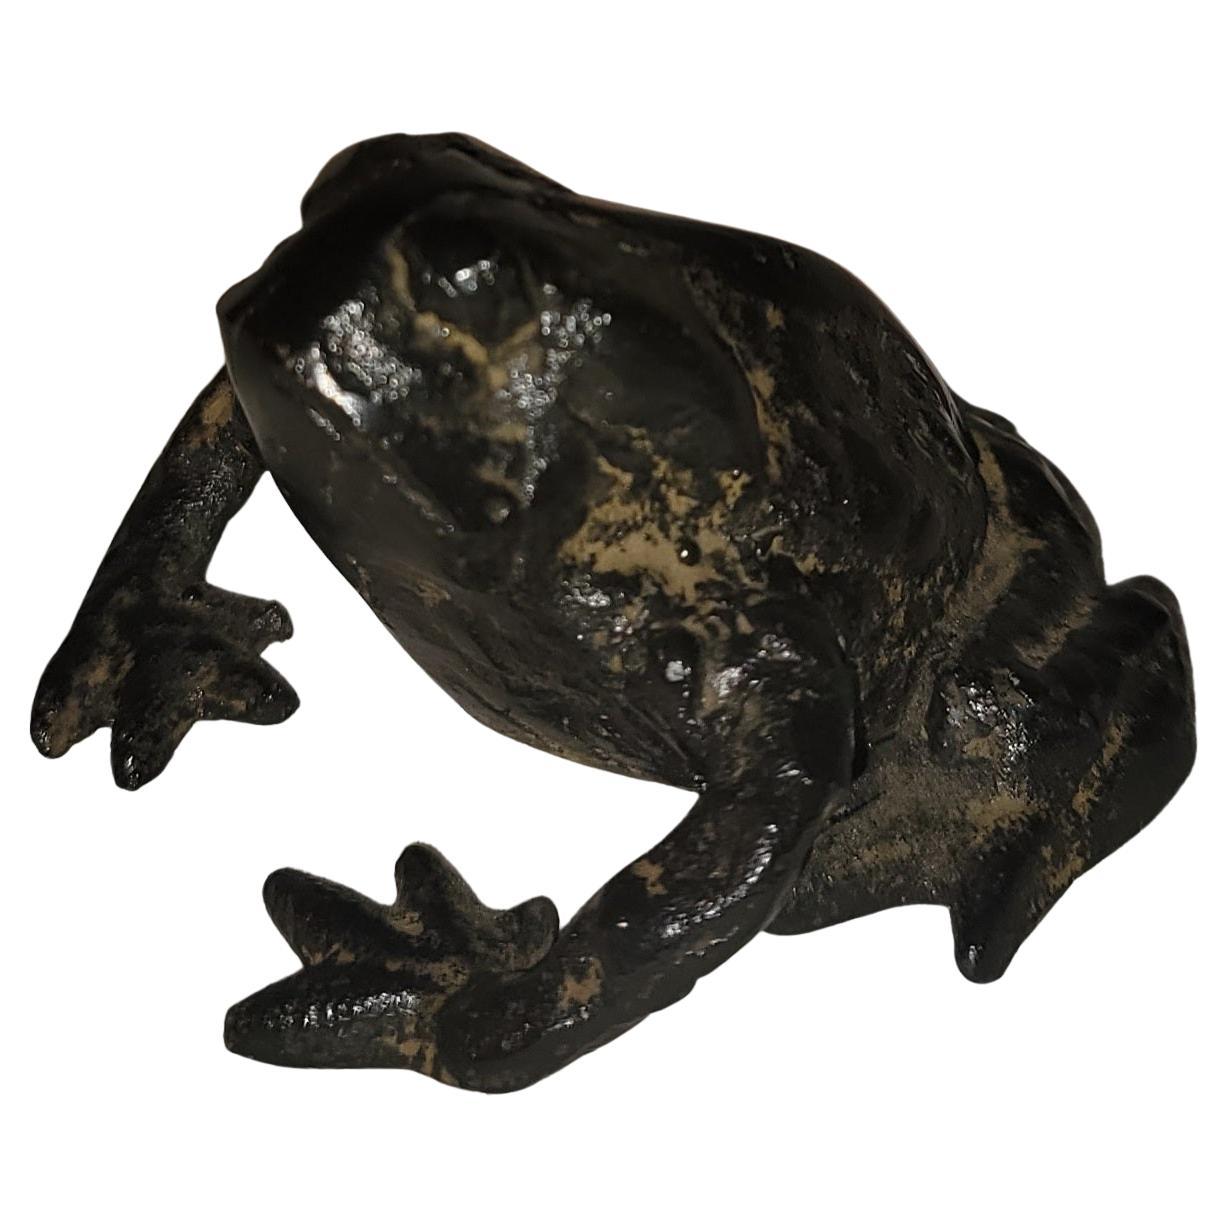 American Frog Garden Ornament or Desk Weight For Sale